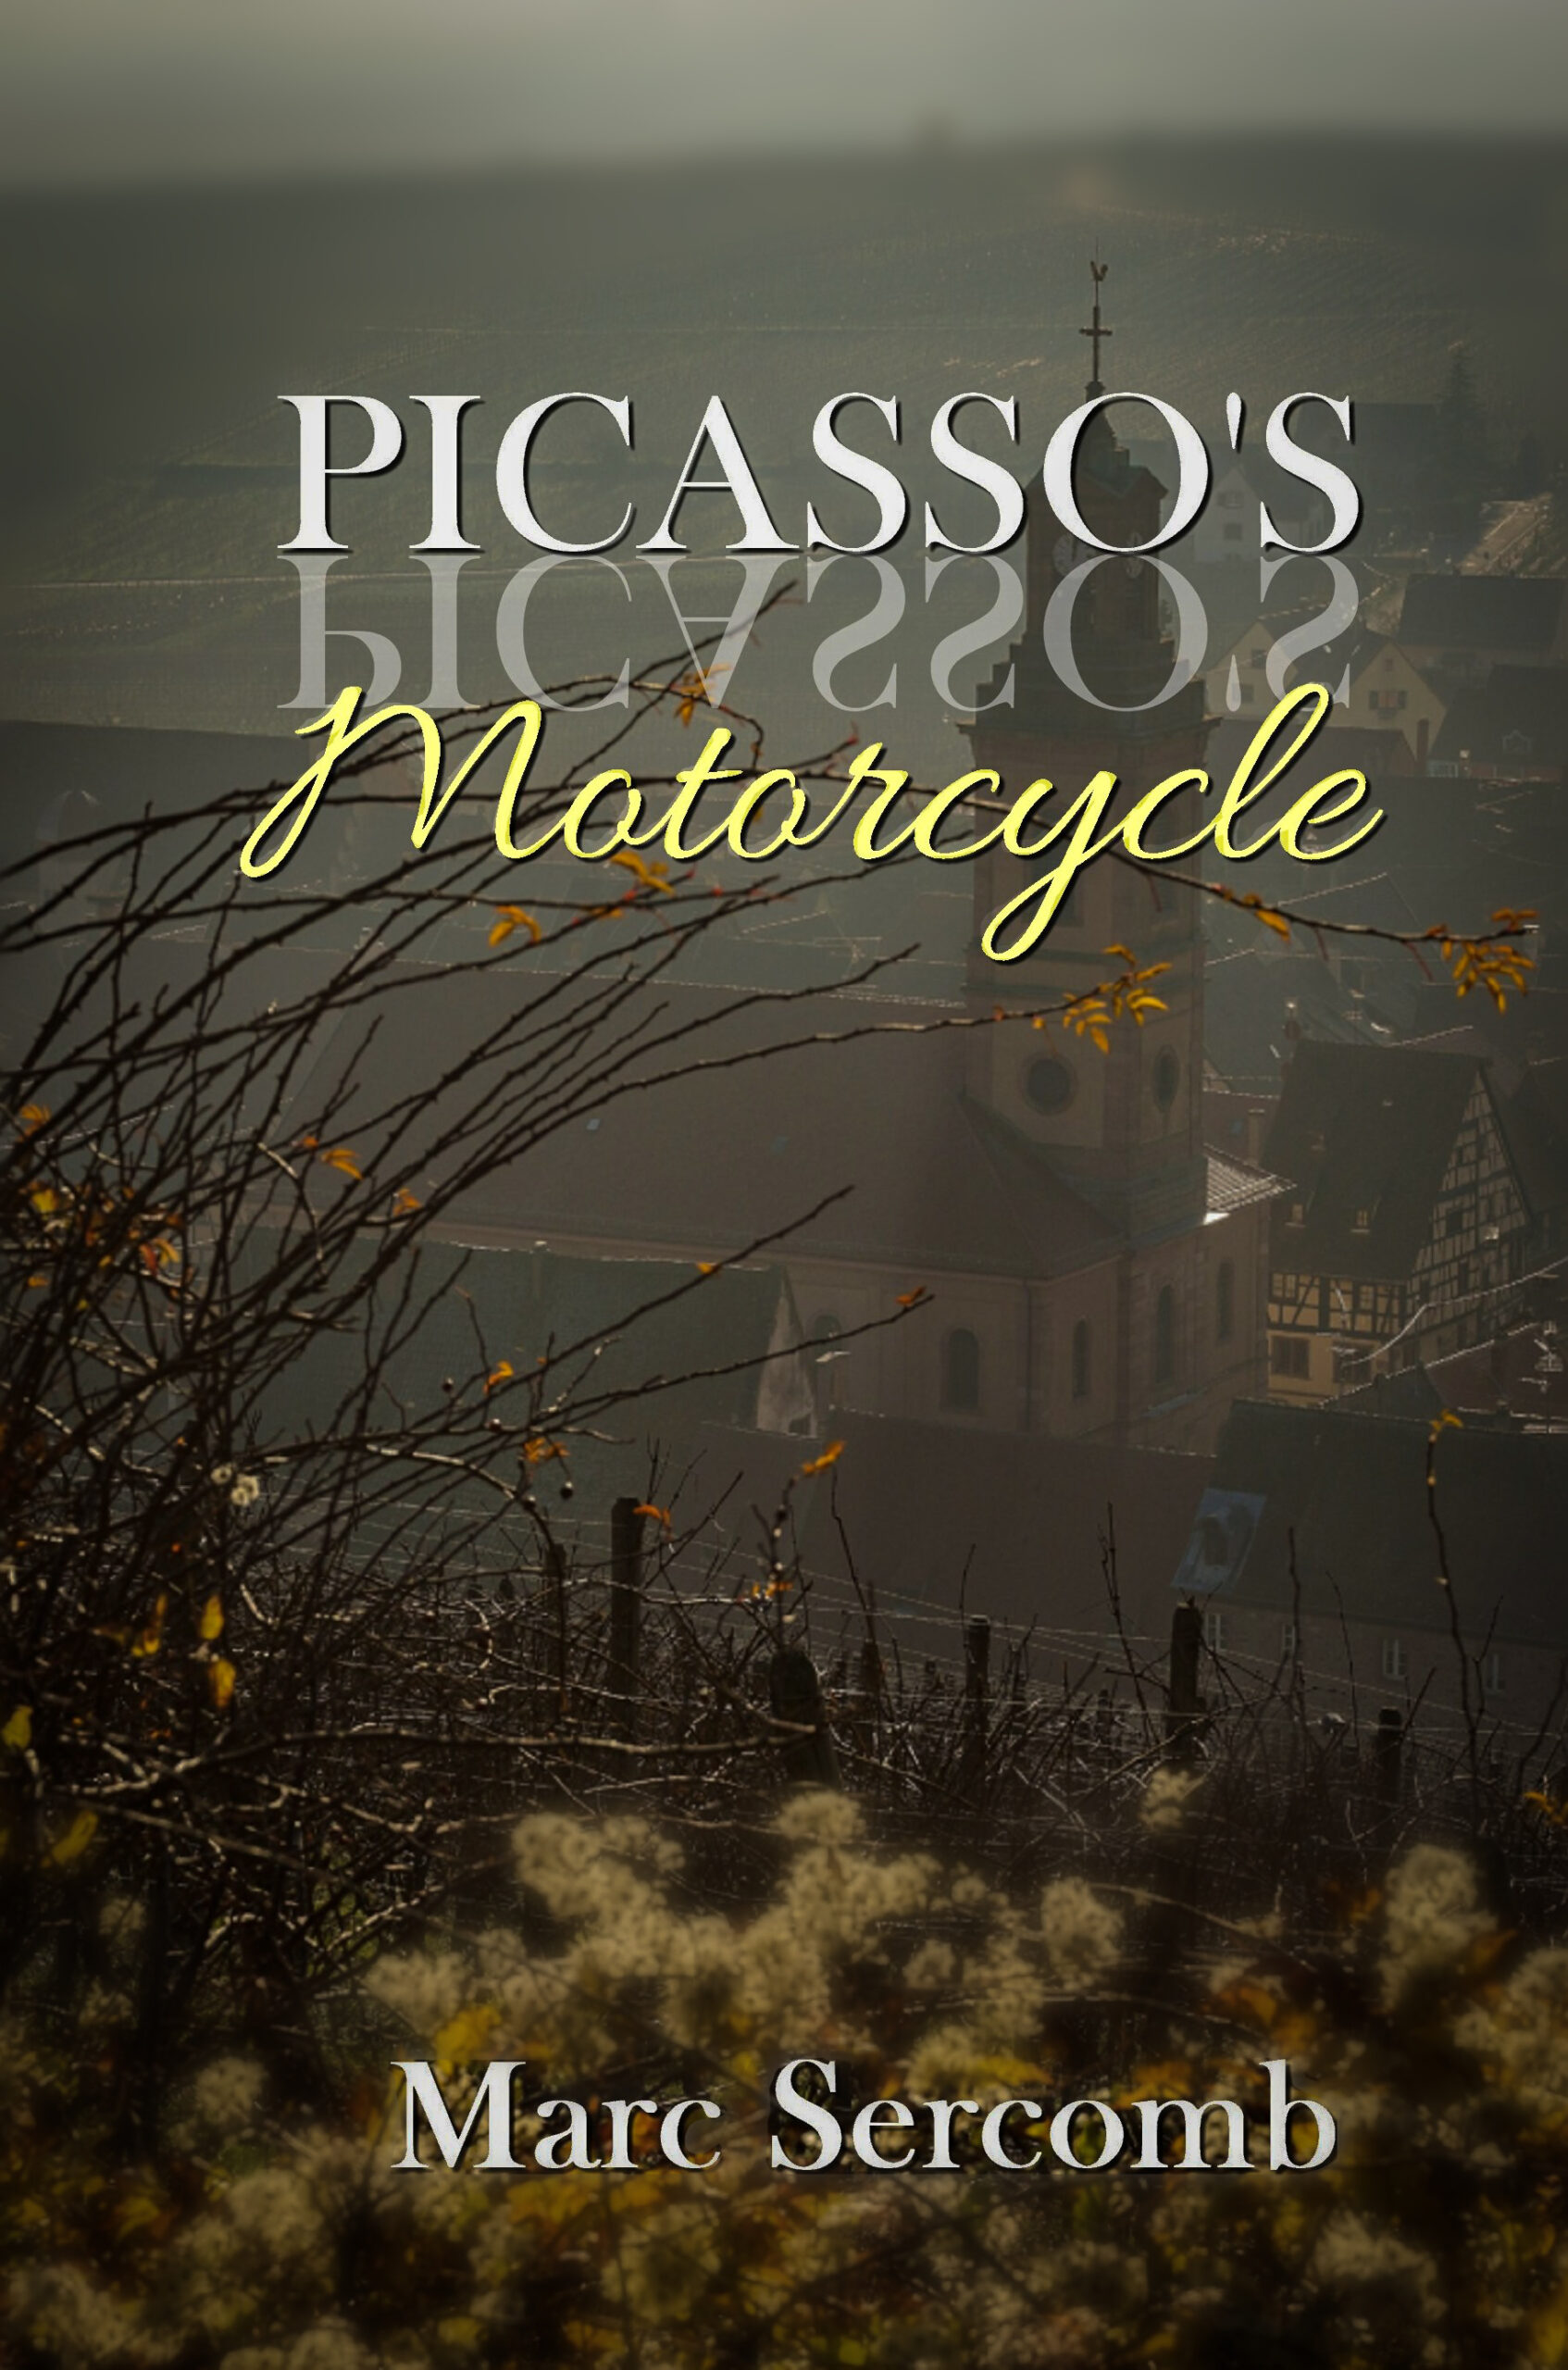 Picasso’s Motorcycle by Marc Sercomb